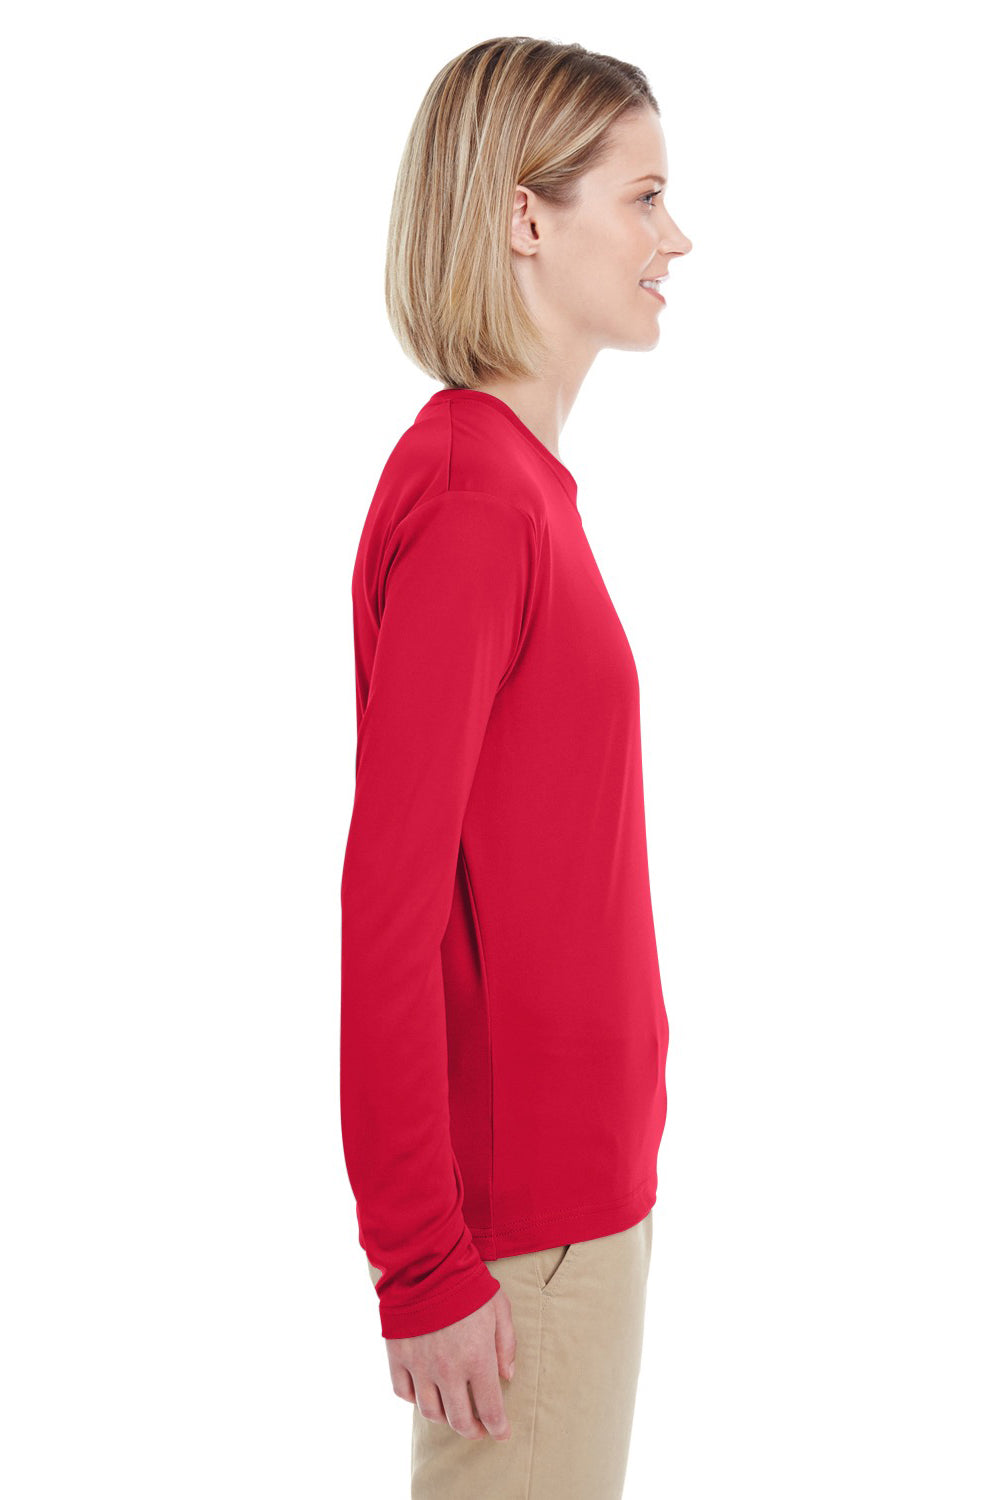 UltraClub 8622W Womens Cool & Dry Performance Moisture Wicking Long Sleeve Crewneck T-Shirt Red Side